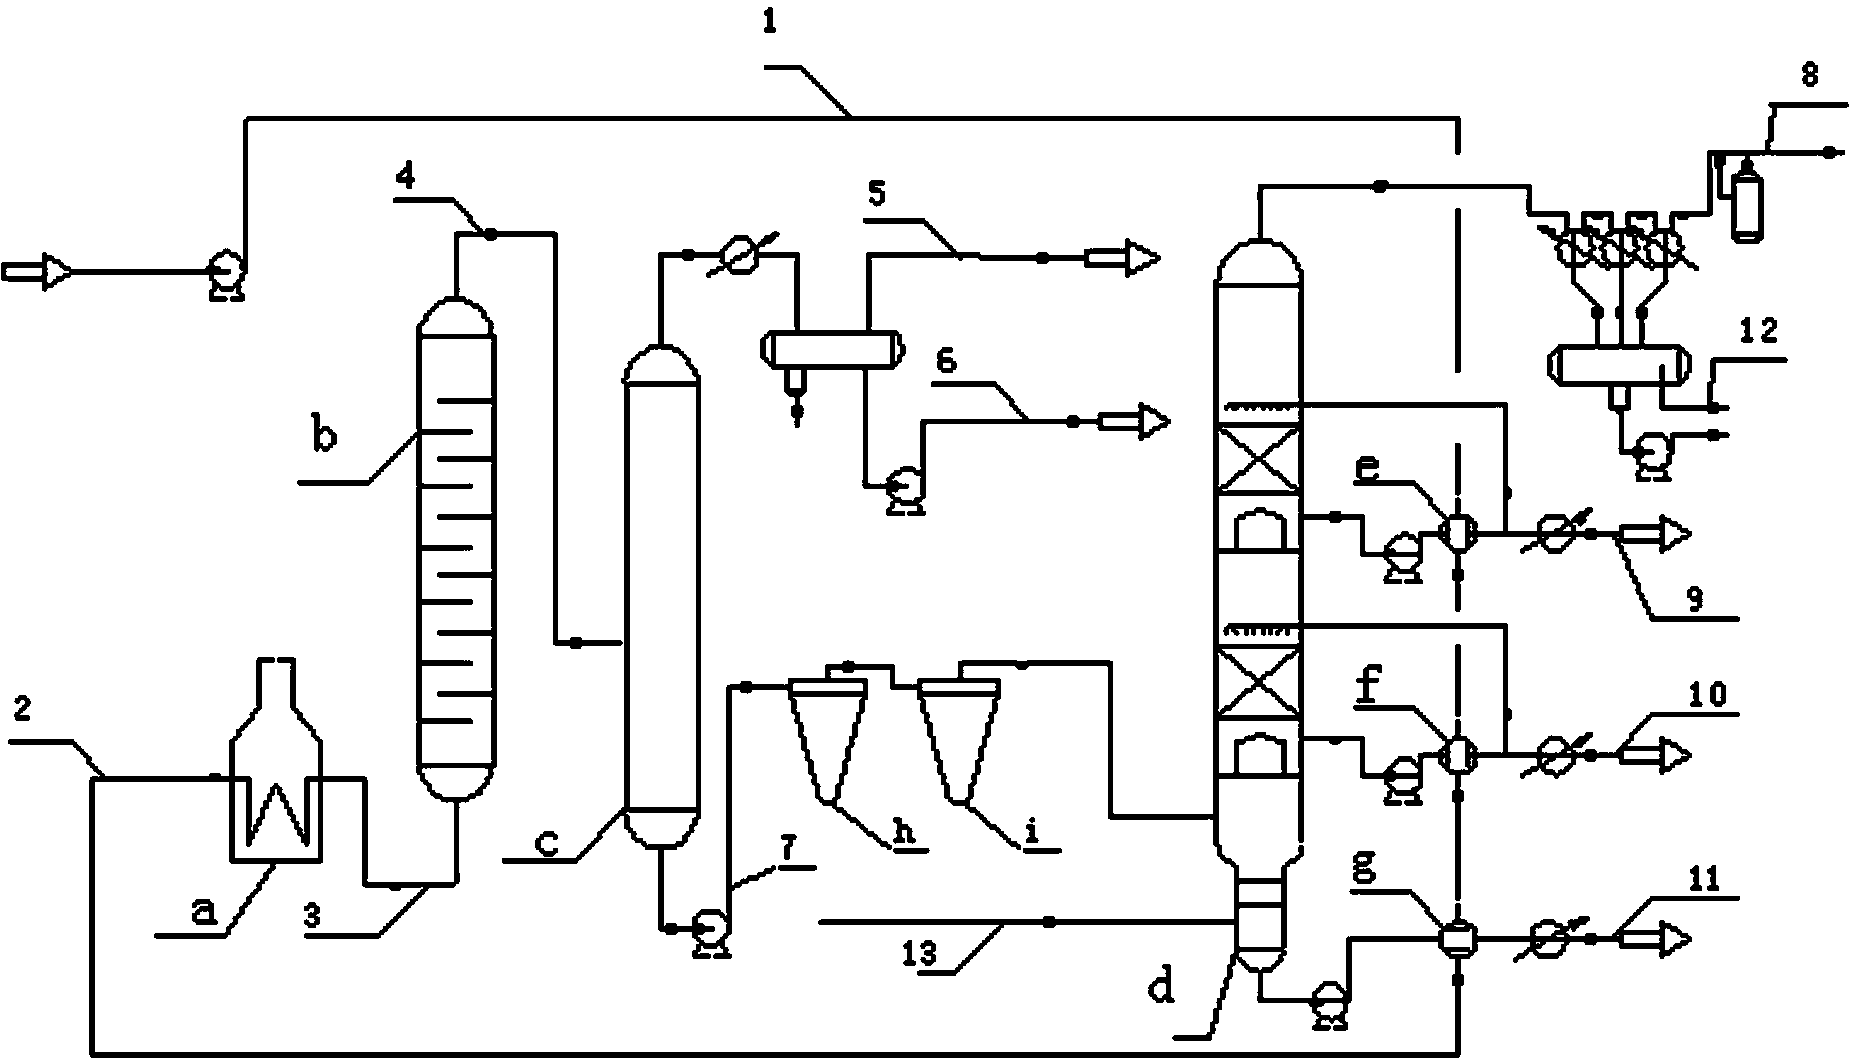 Continuous distillation technology used for regeneration of spent lubrication oil